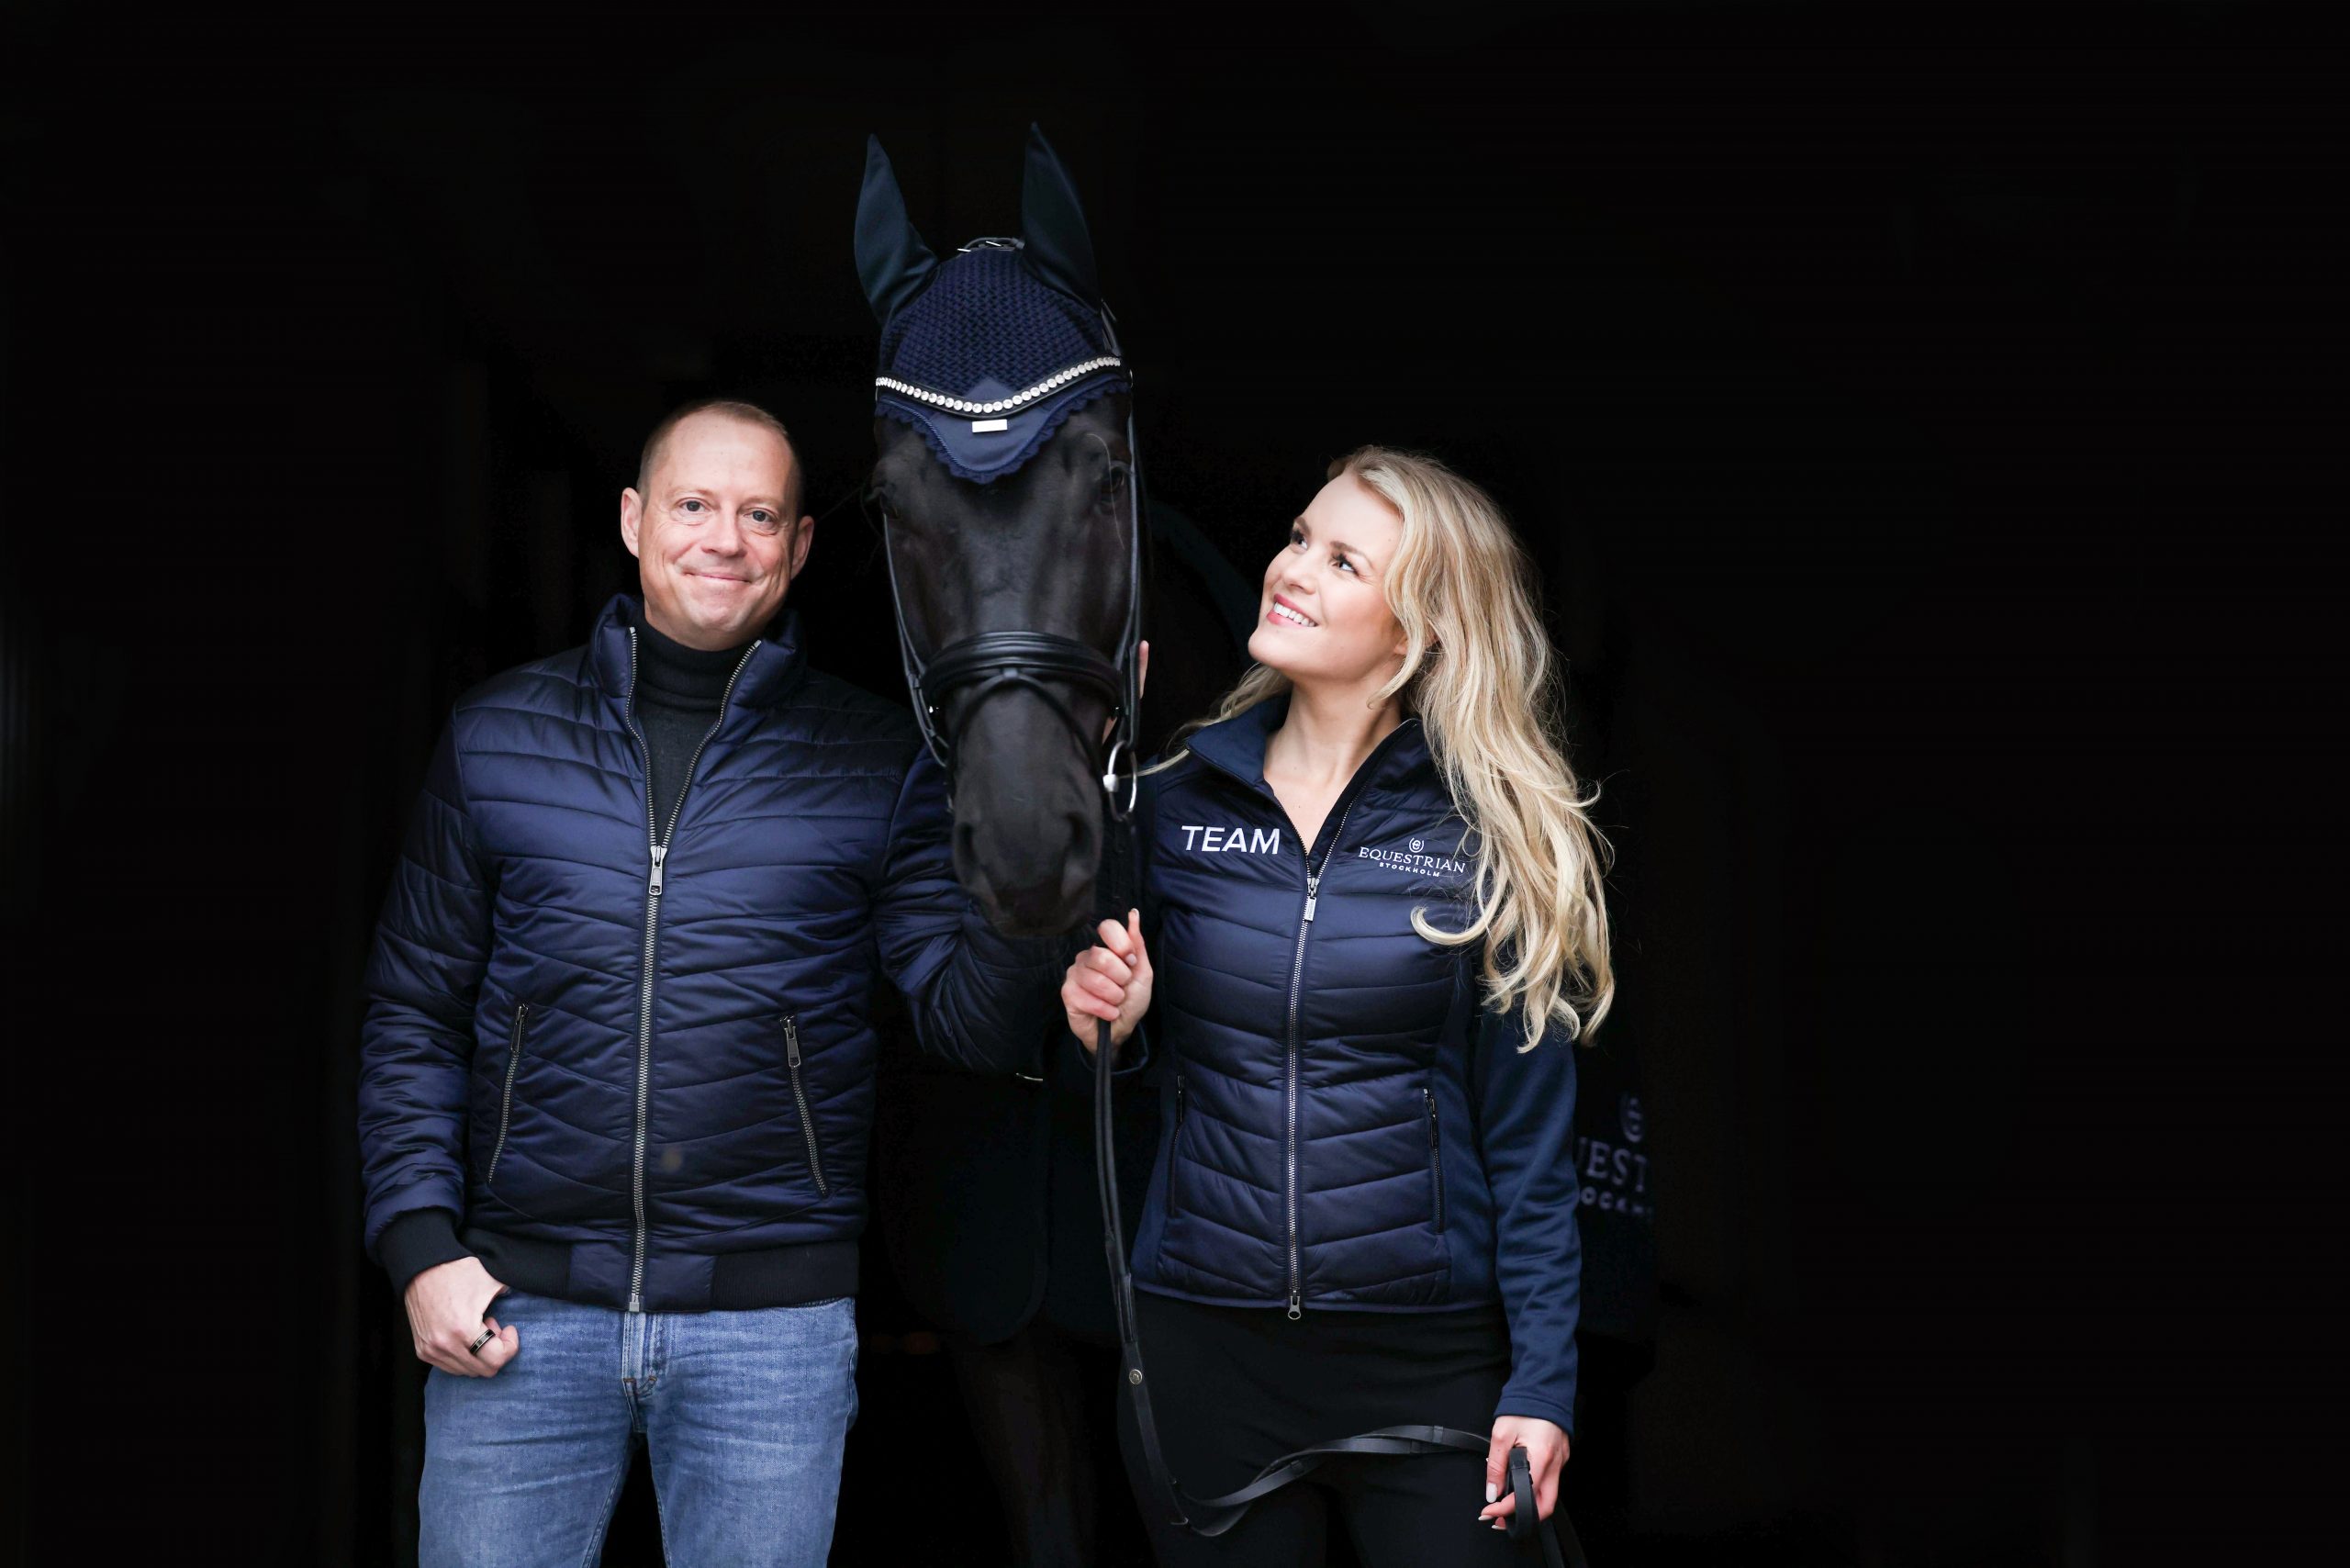 New Chairman of the board in Equestrian Stockholm